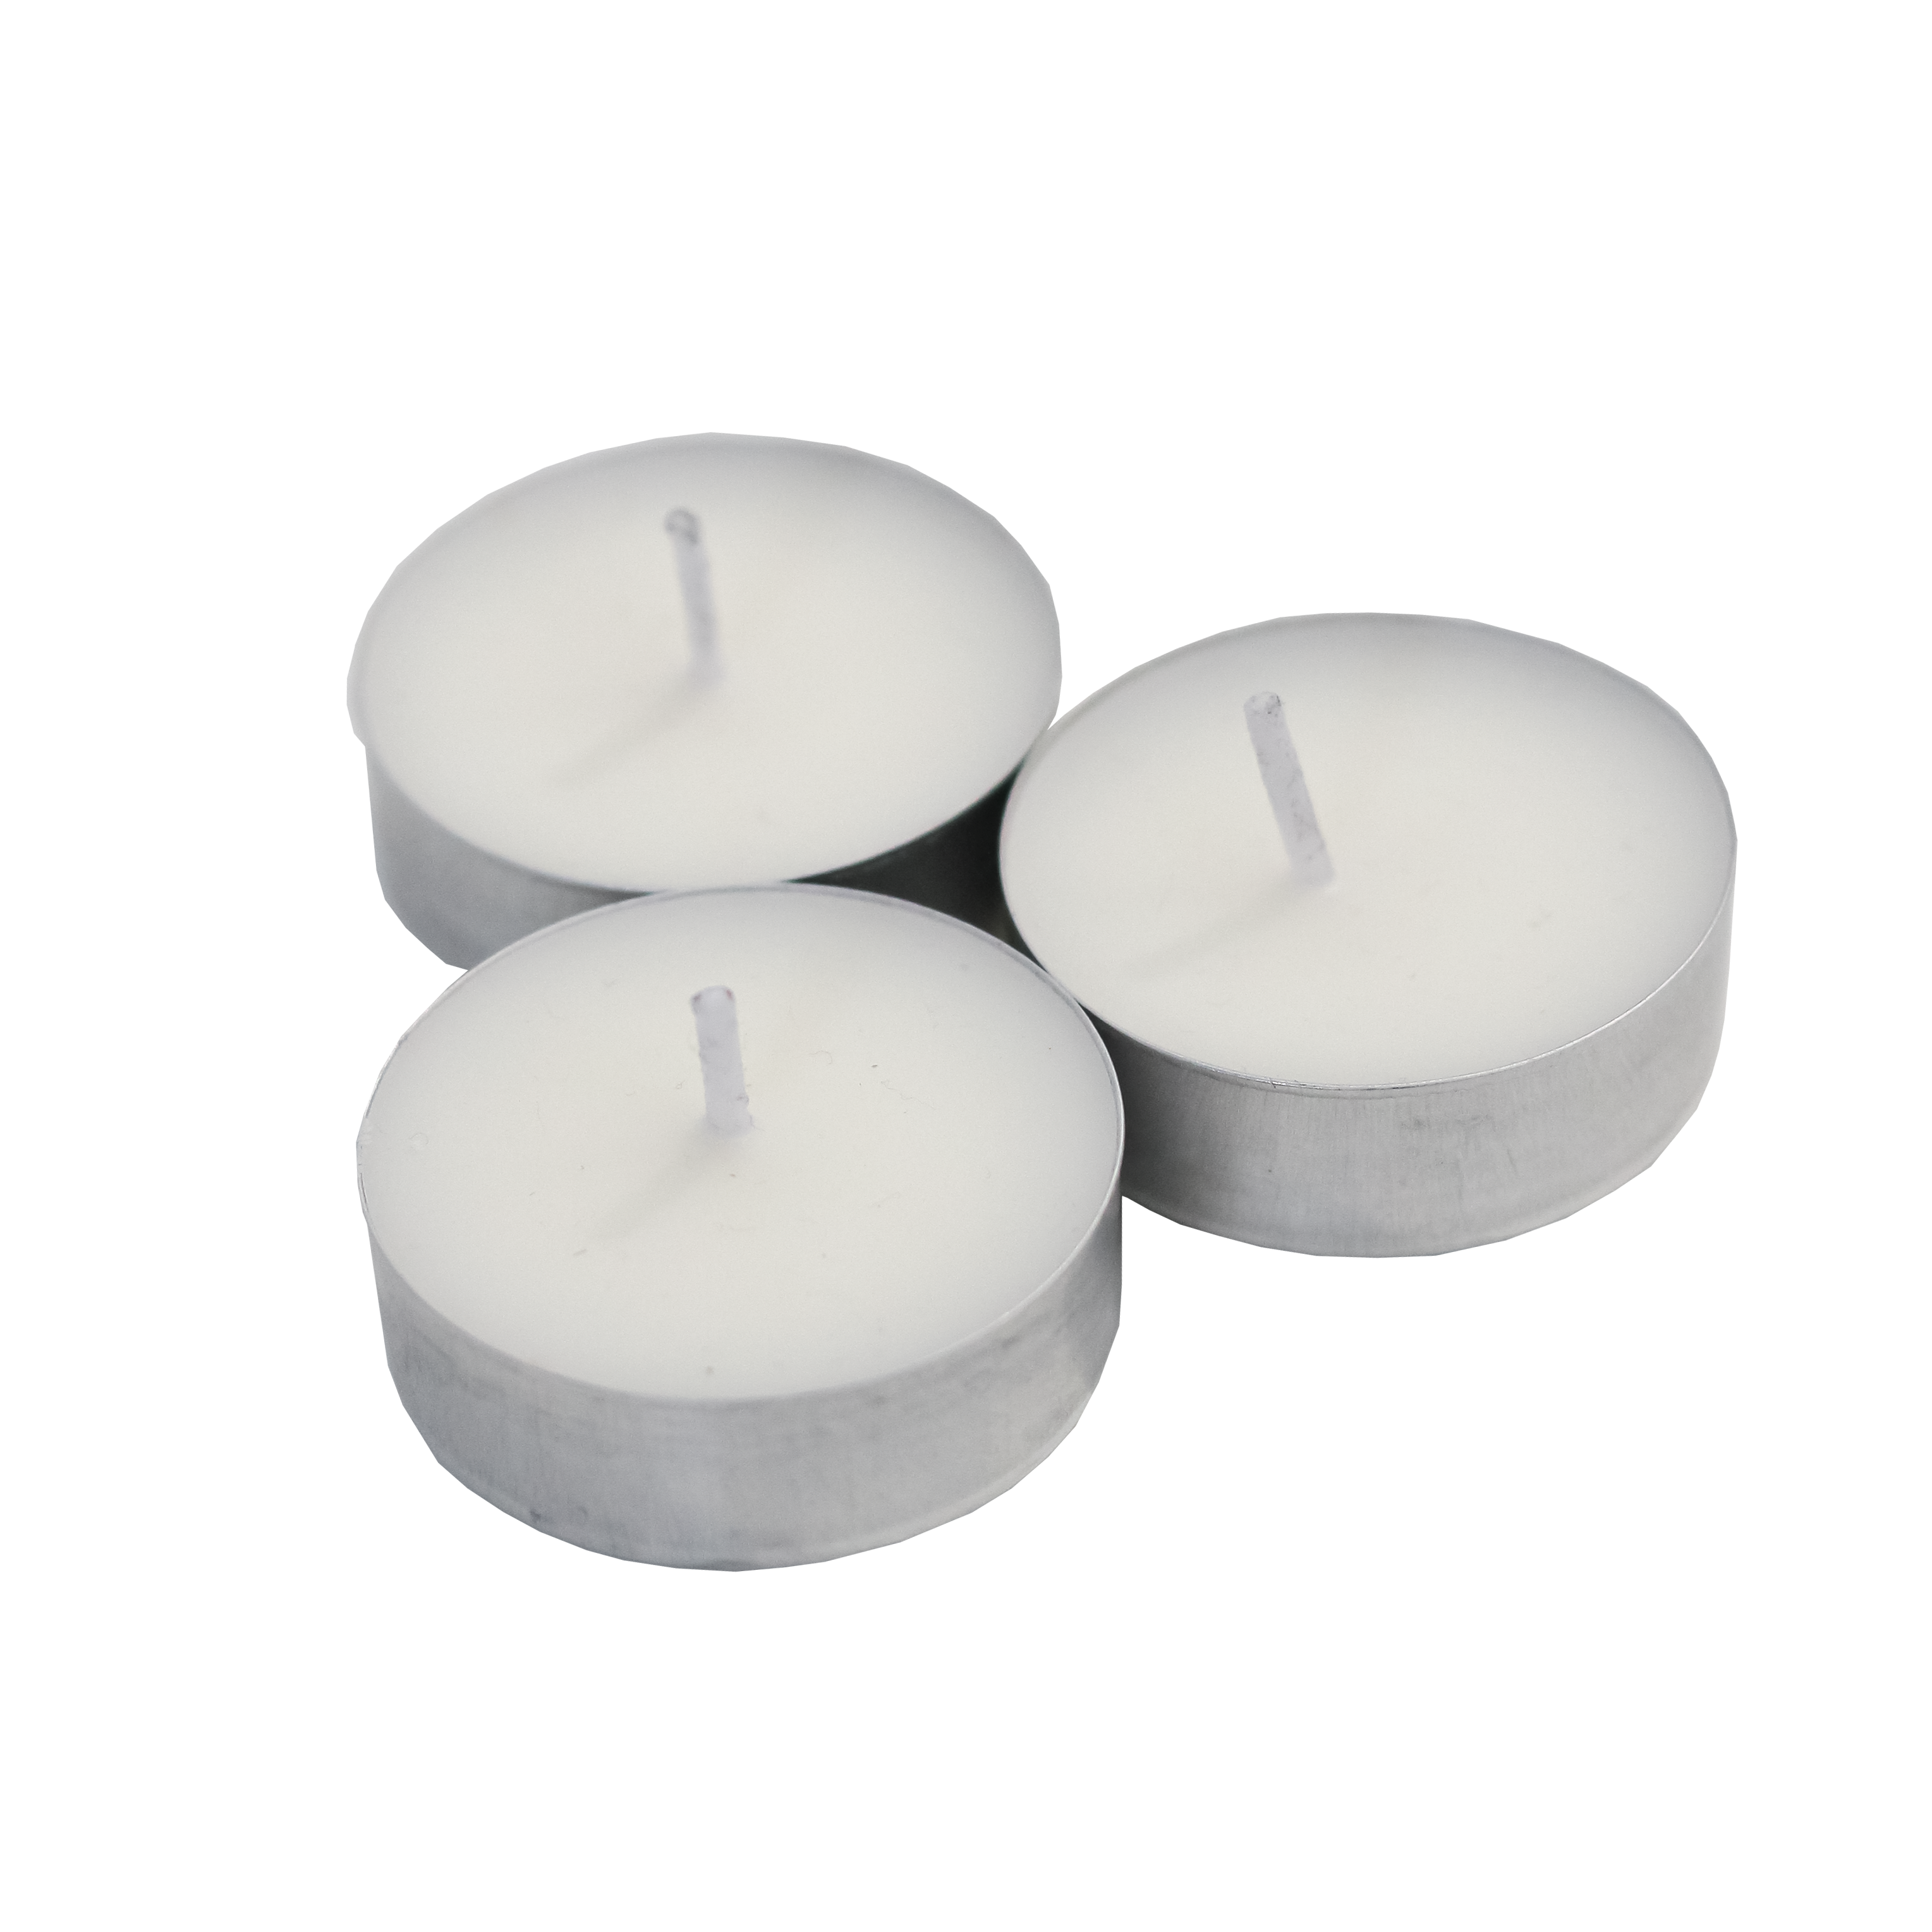 Individual Scented Soy Wax Tealights